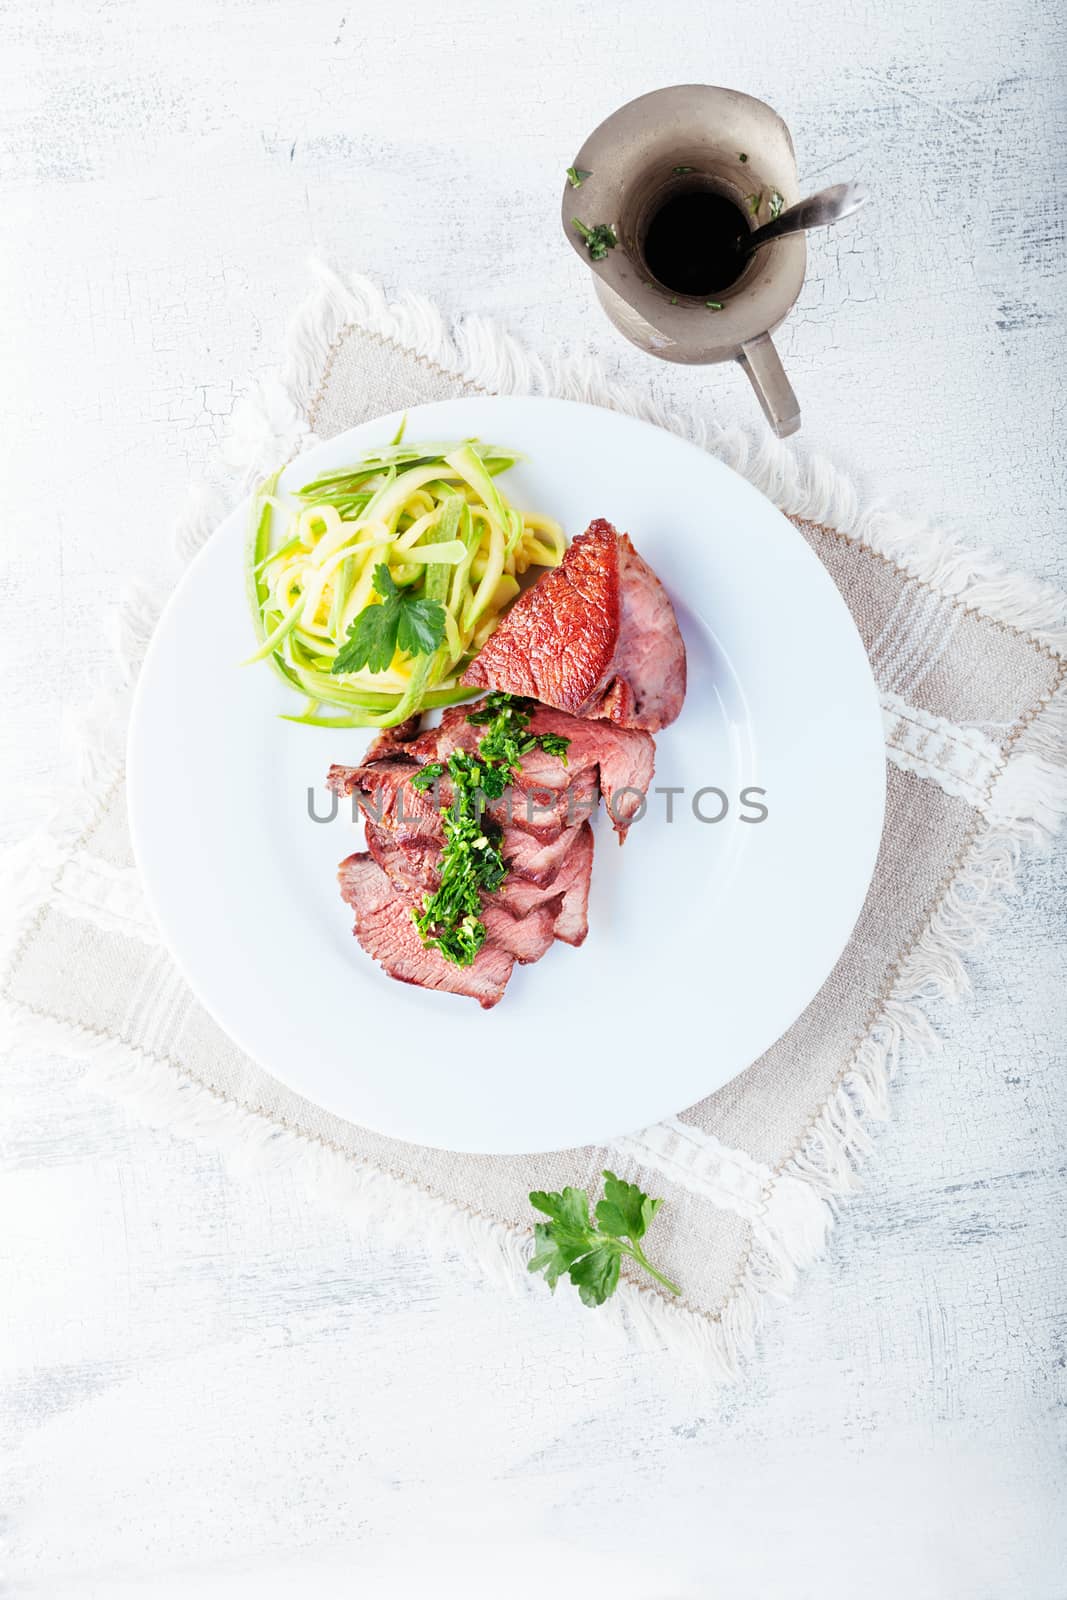 Zucchini pasta and meat by supercat67